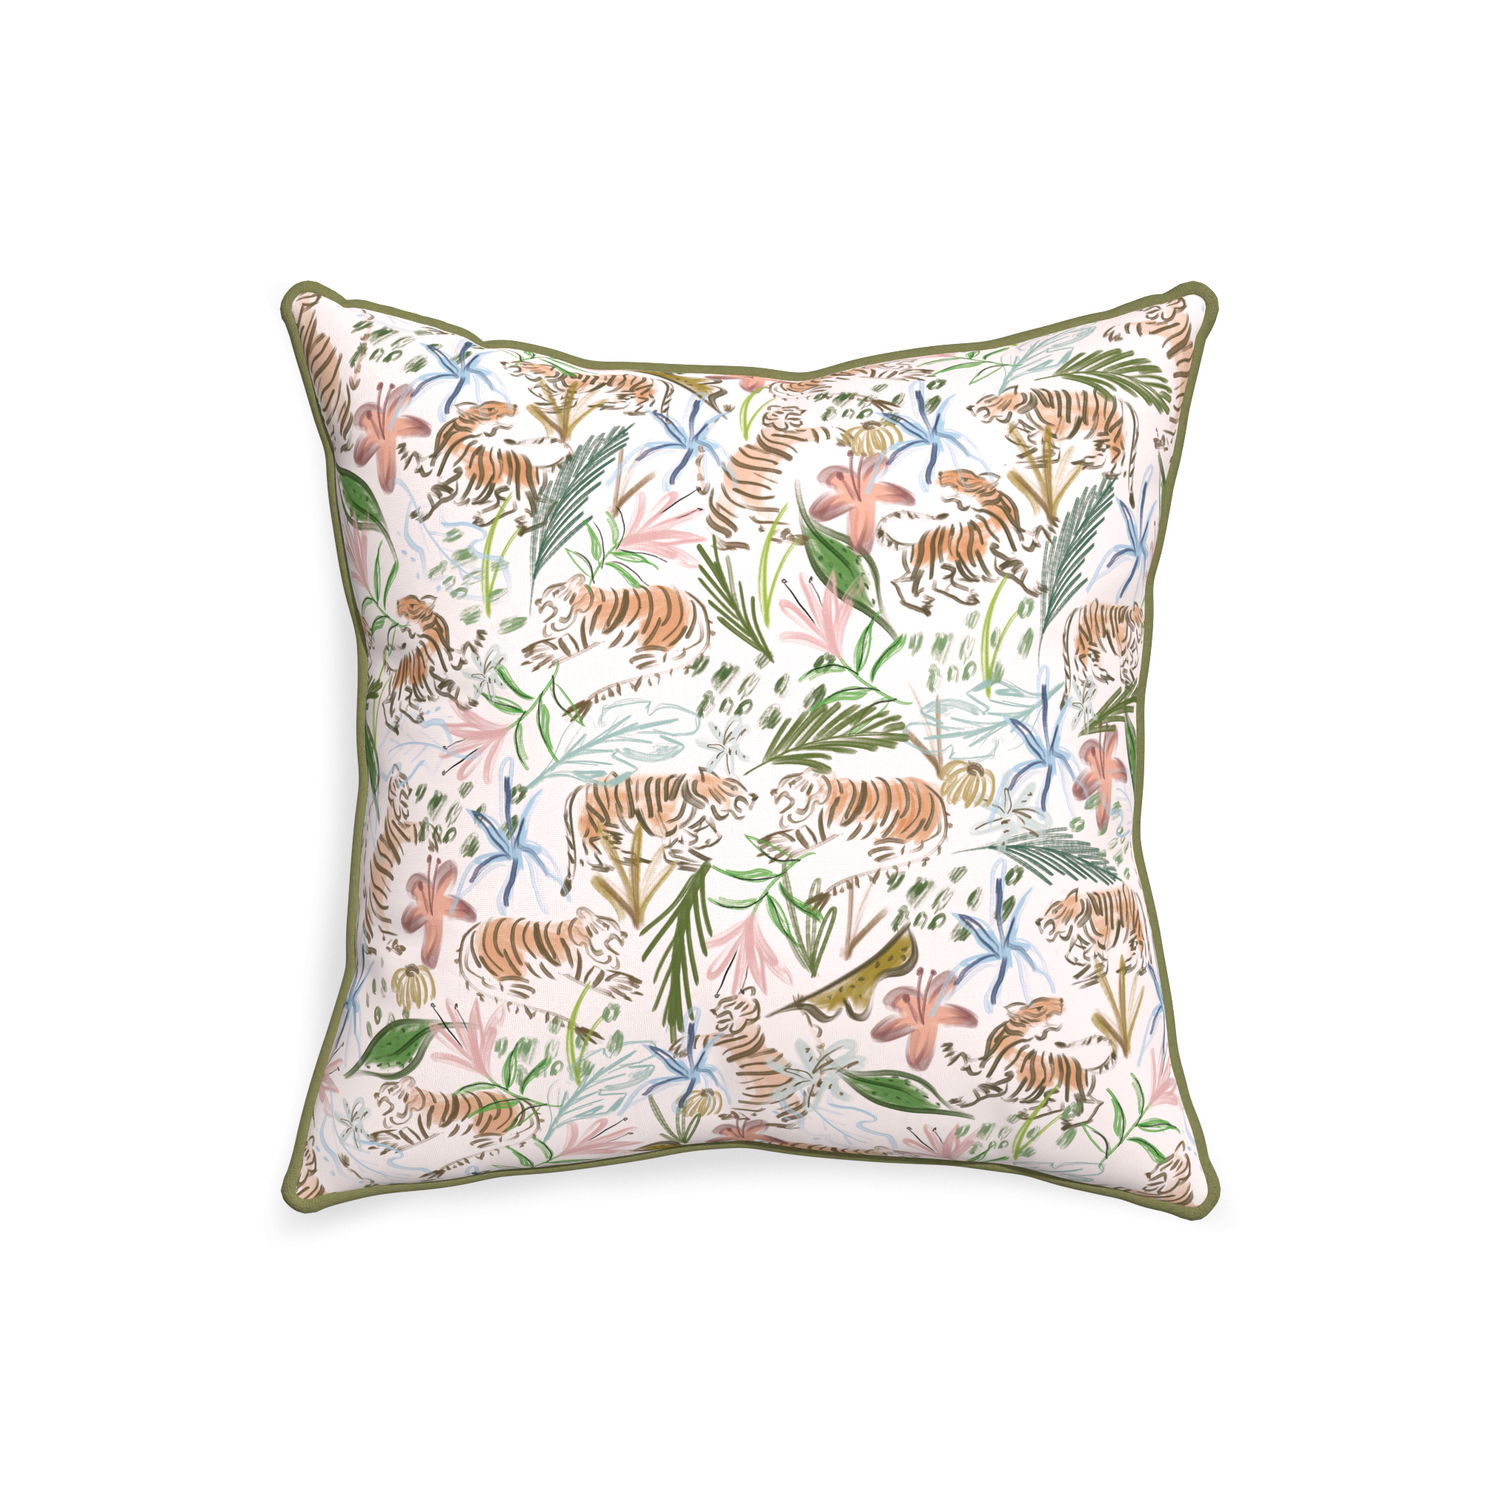 20-square frida pink custom pillow with moss piping on white background